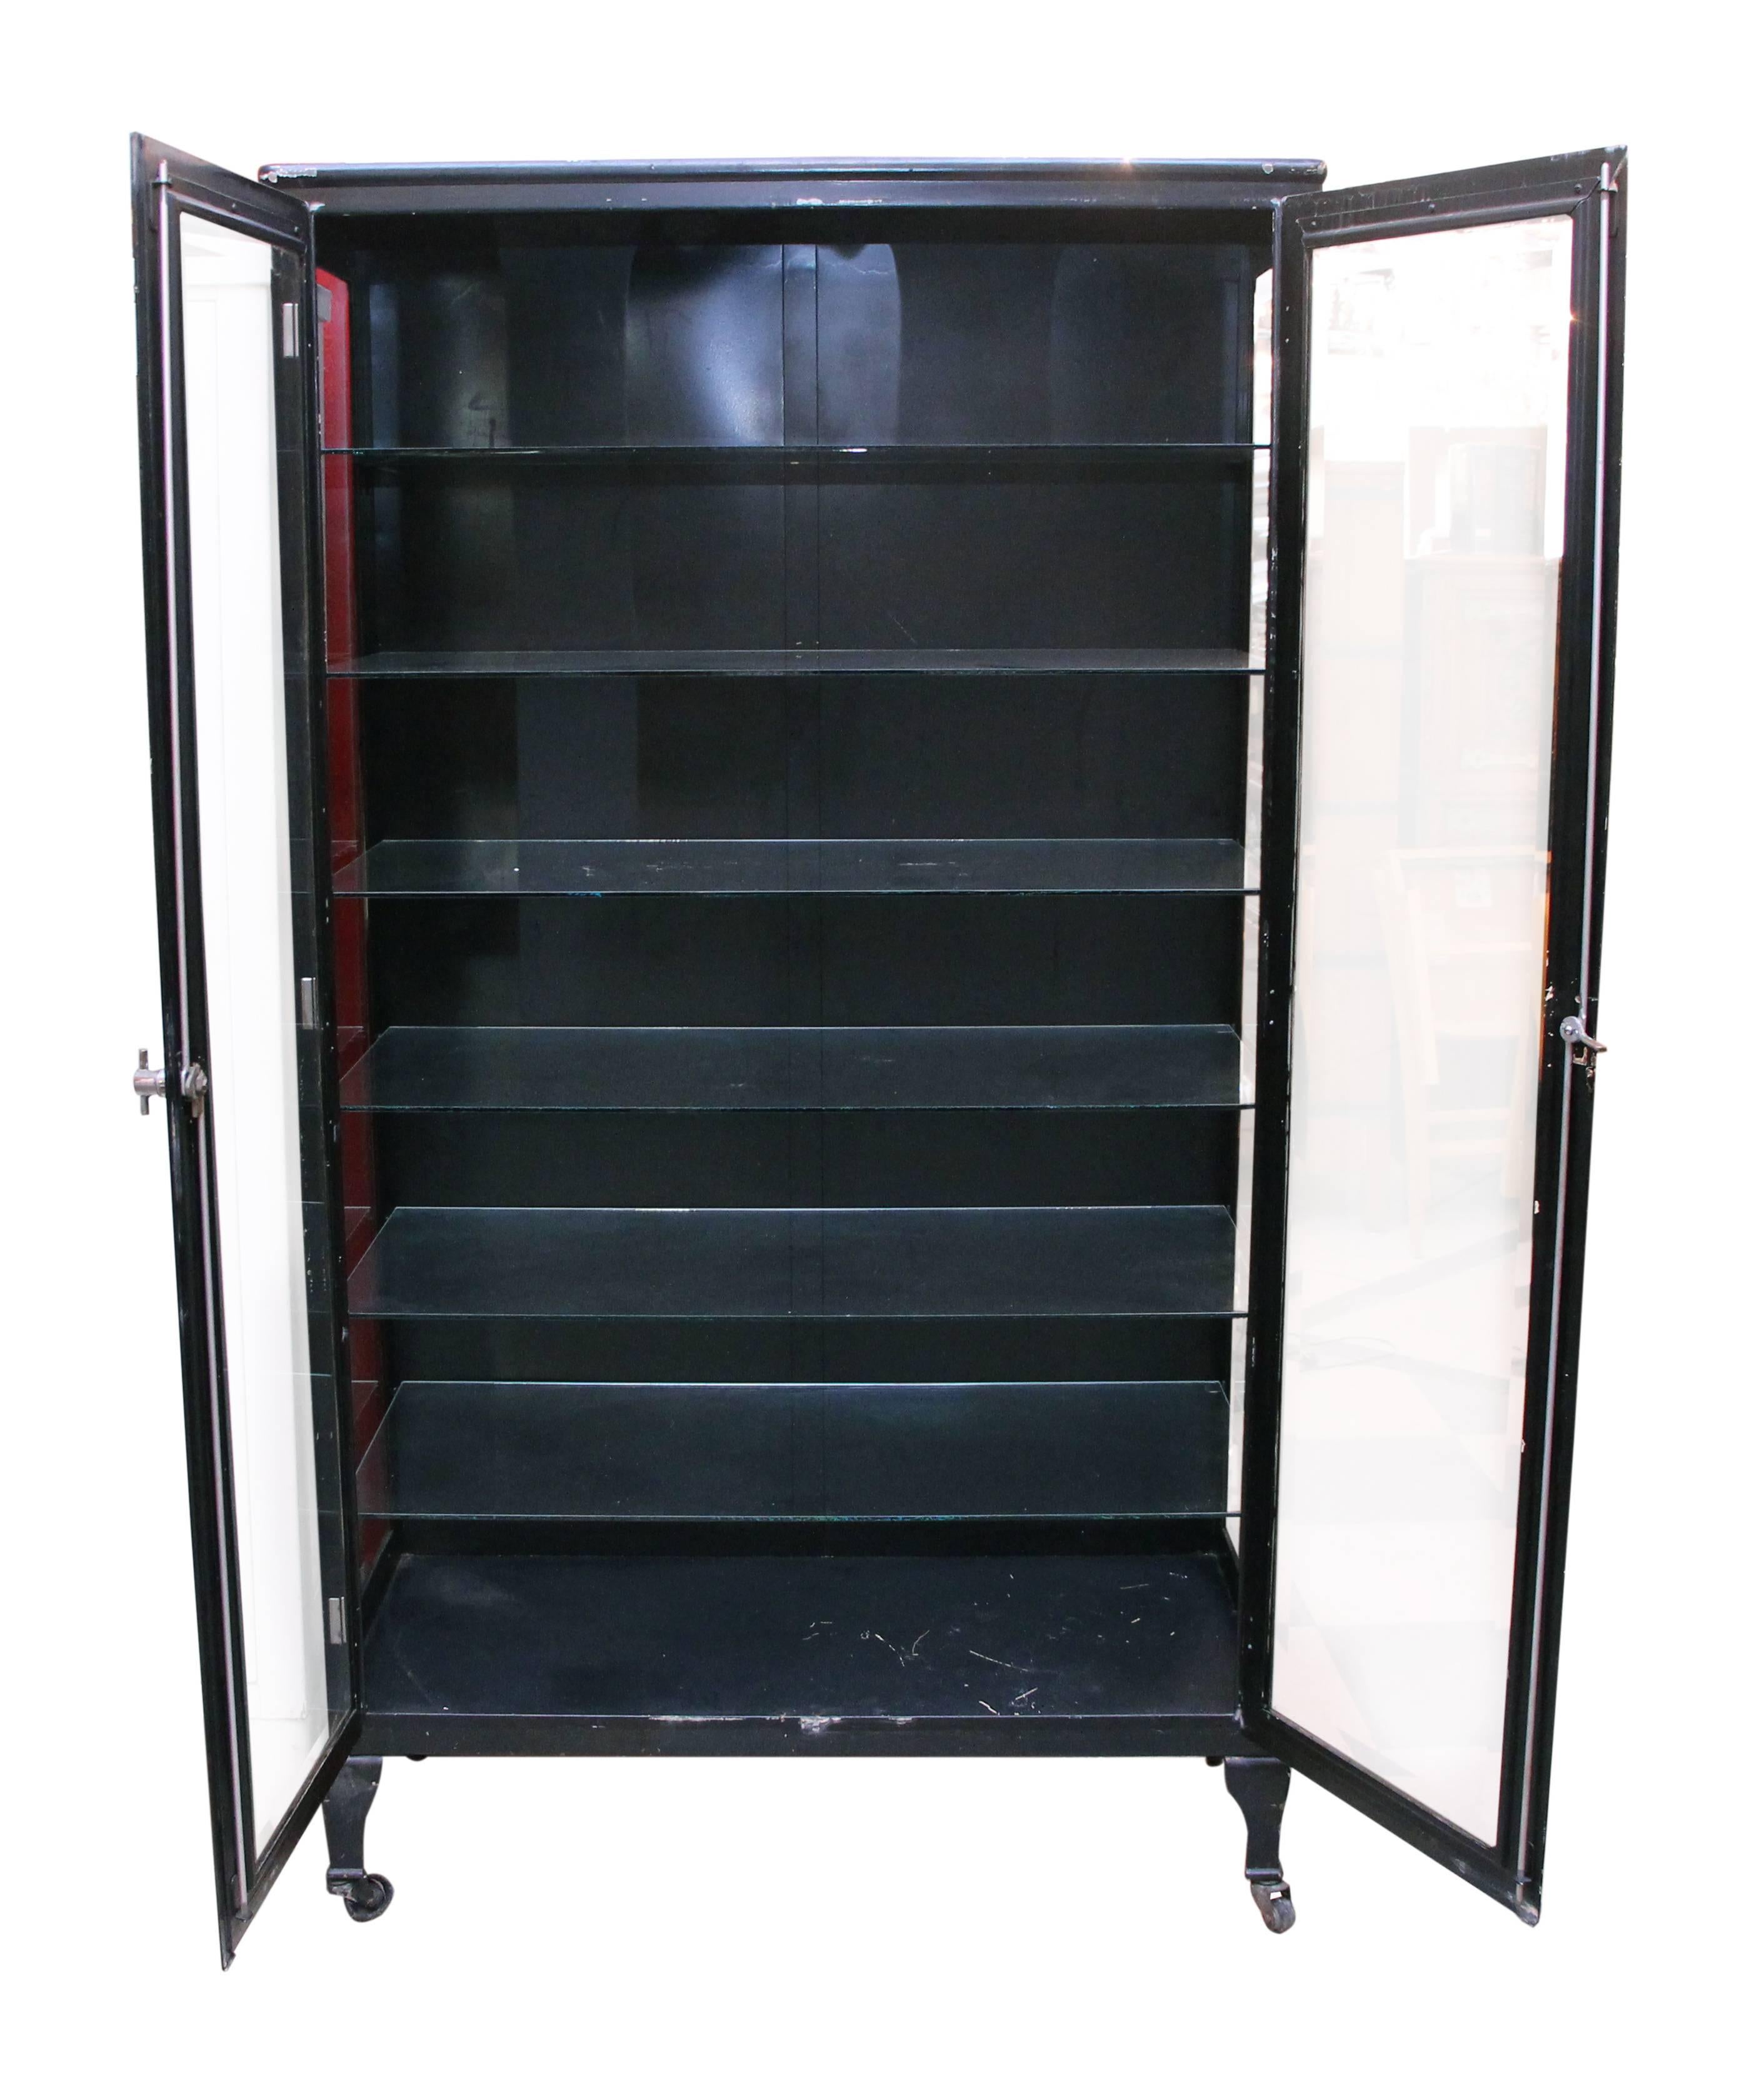 1920s vintage black medical cabinet with glass shelves and beveled glass doors. This item can be viewed at our 5 East 16th St, Union Square location in Manhattan.